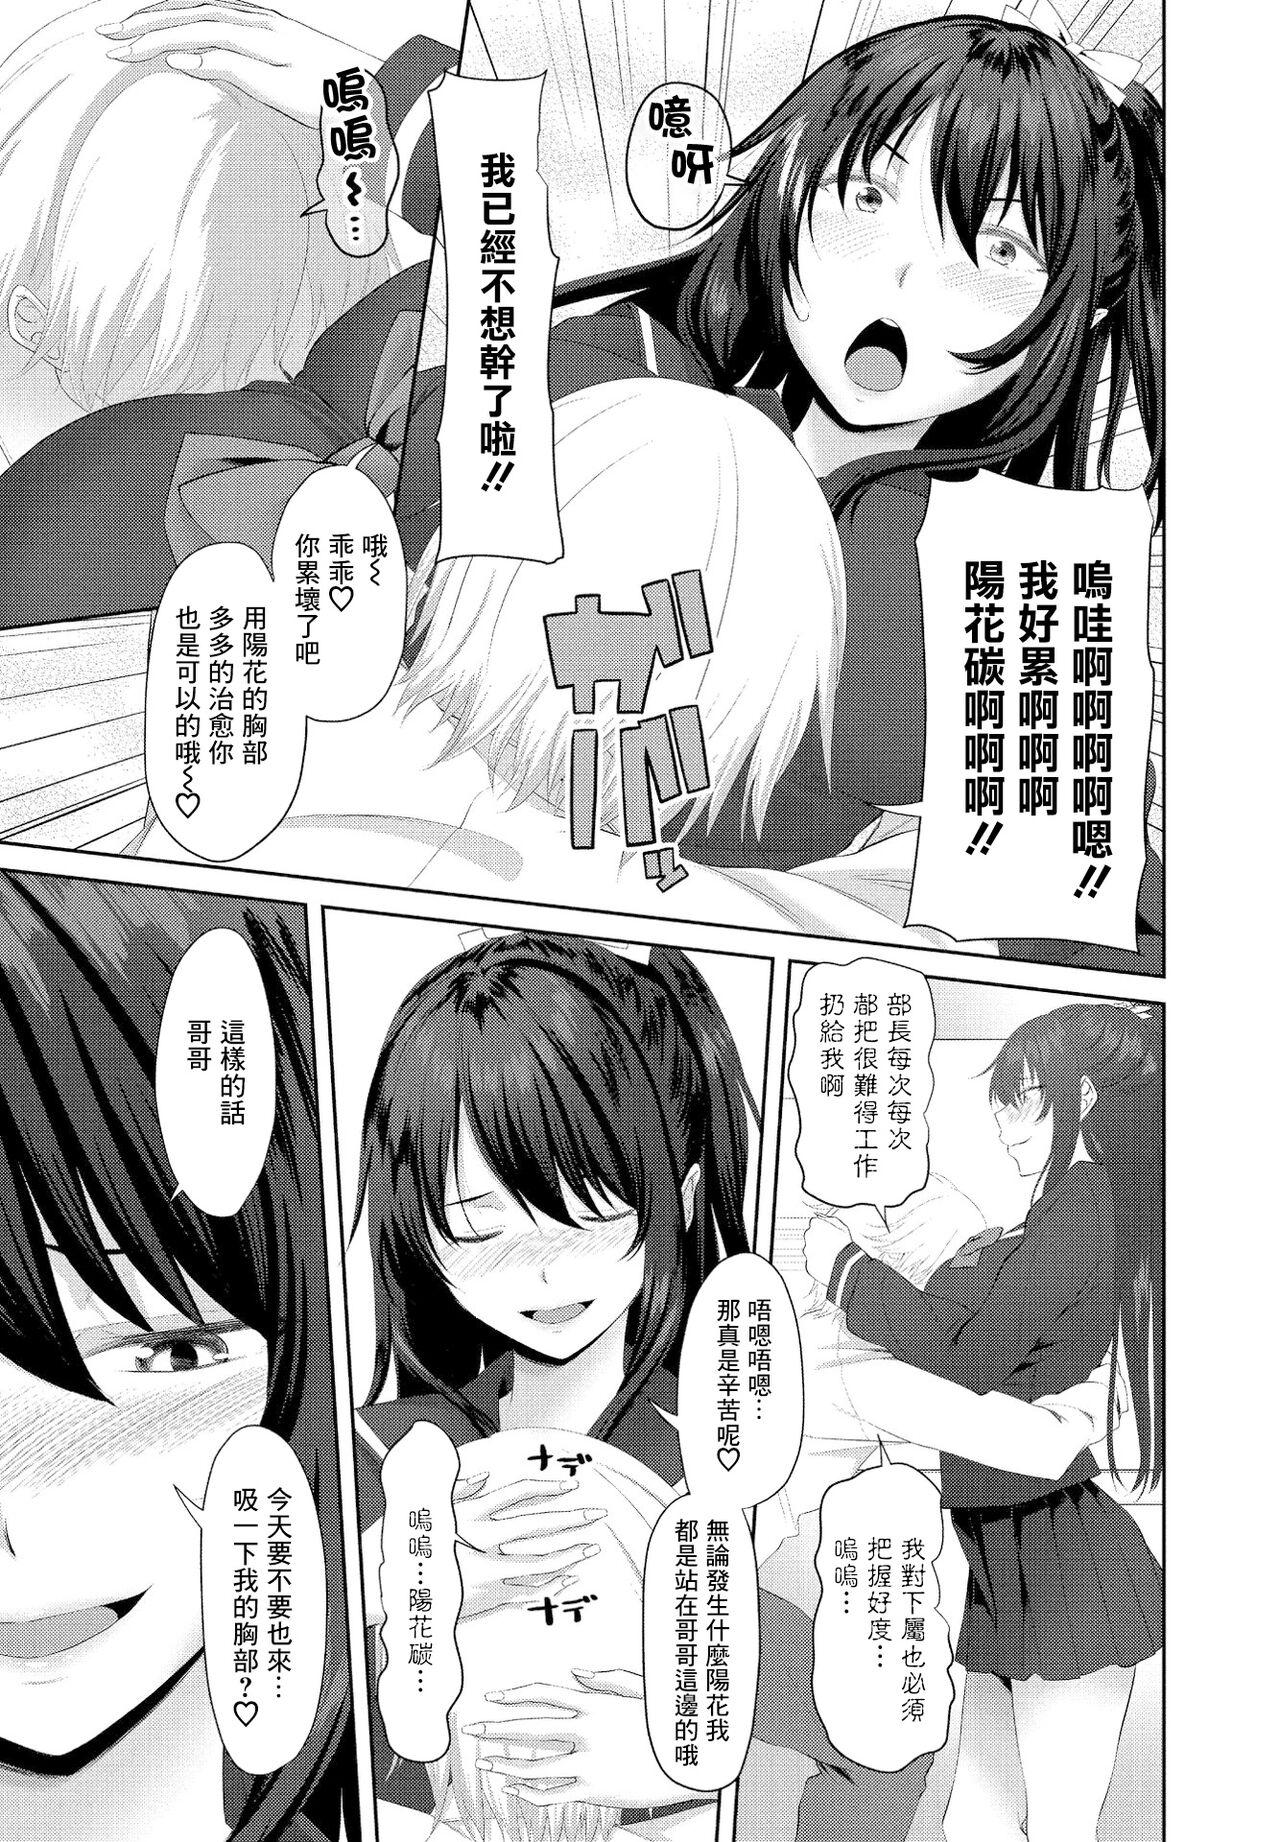 Asses Onii-chan Doukoukai Ch. 2 Anal Gape - Page 5